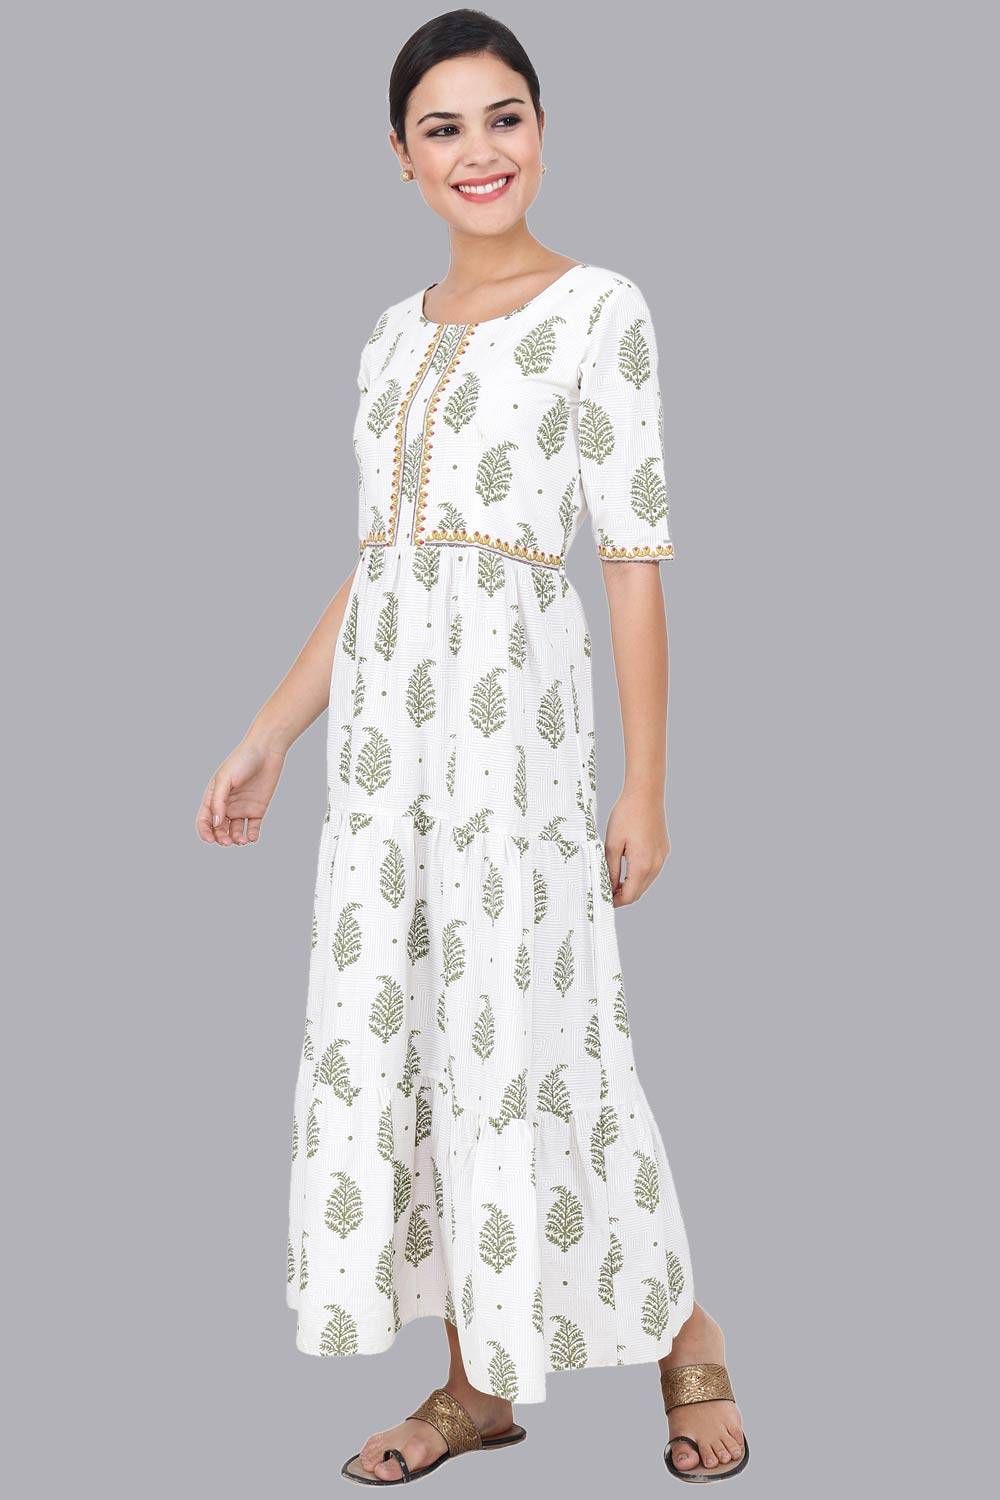 White Leaf Printed MaxiaDress For Women